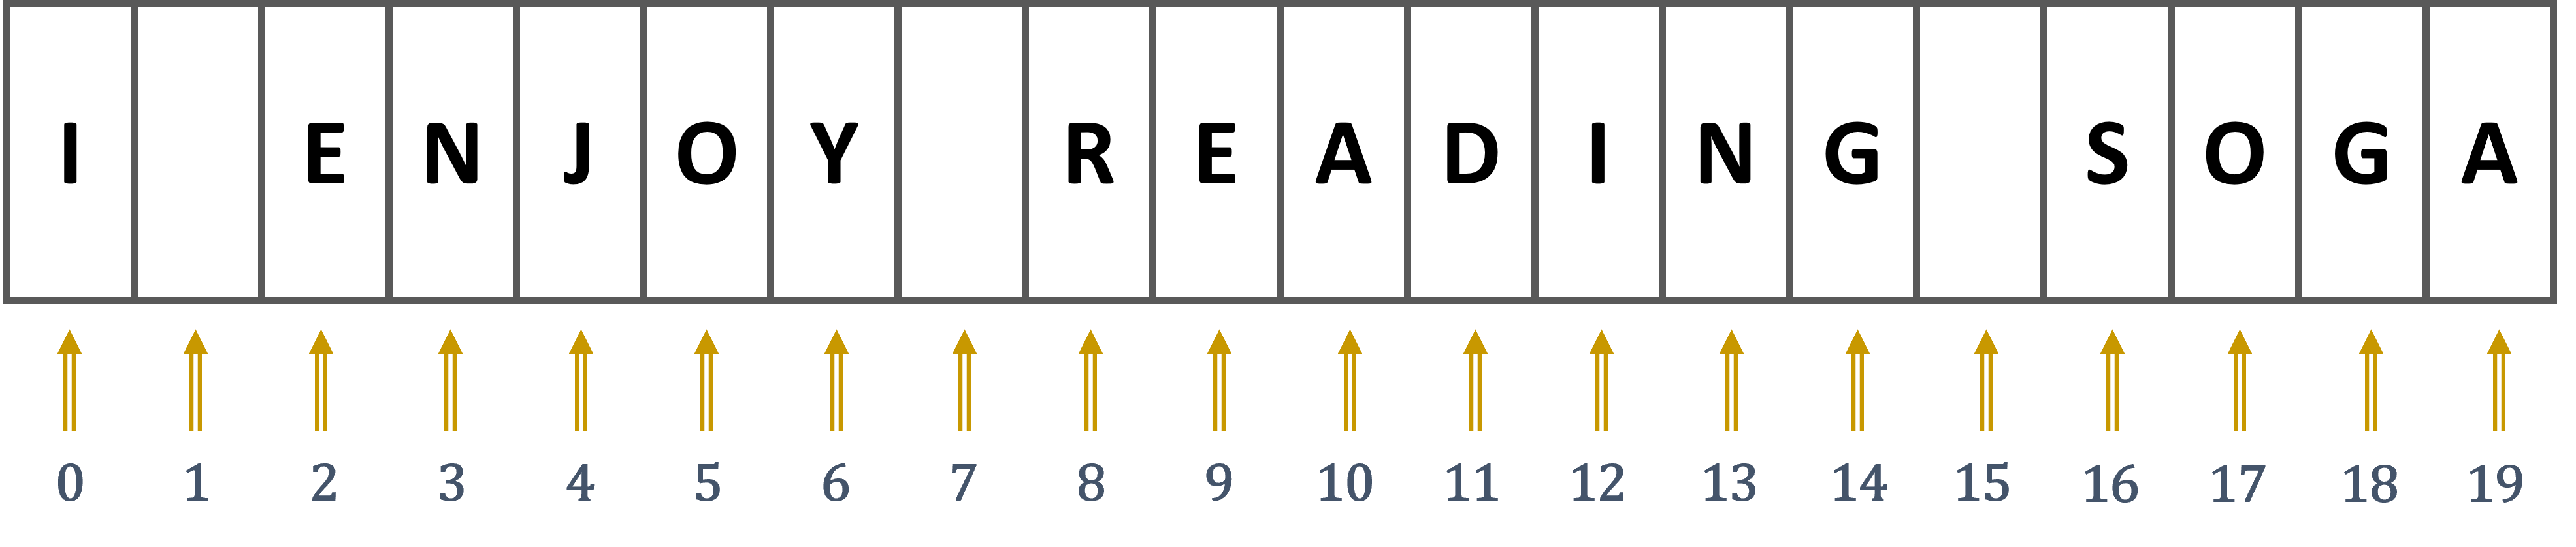 Image to demonstrate how positional numbers in Pythons are connected with values in value chains